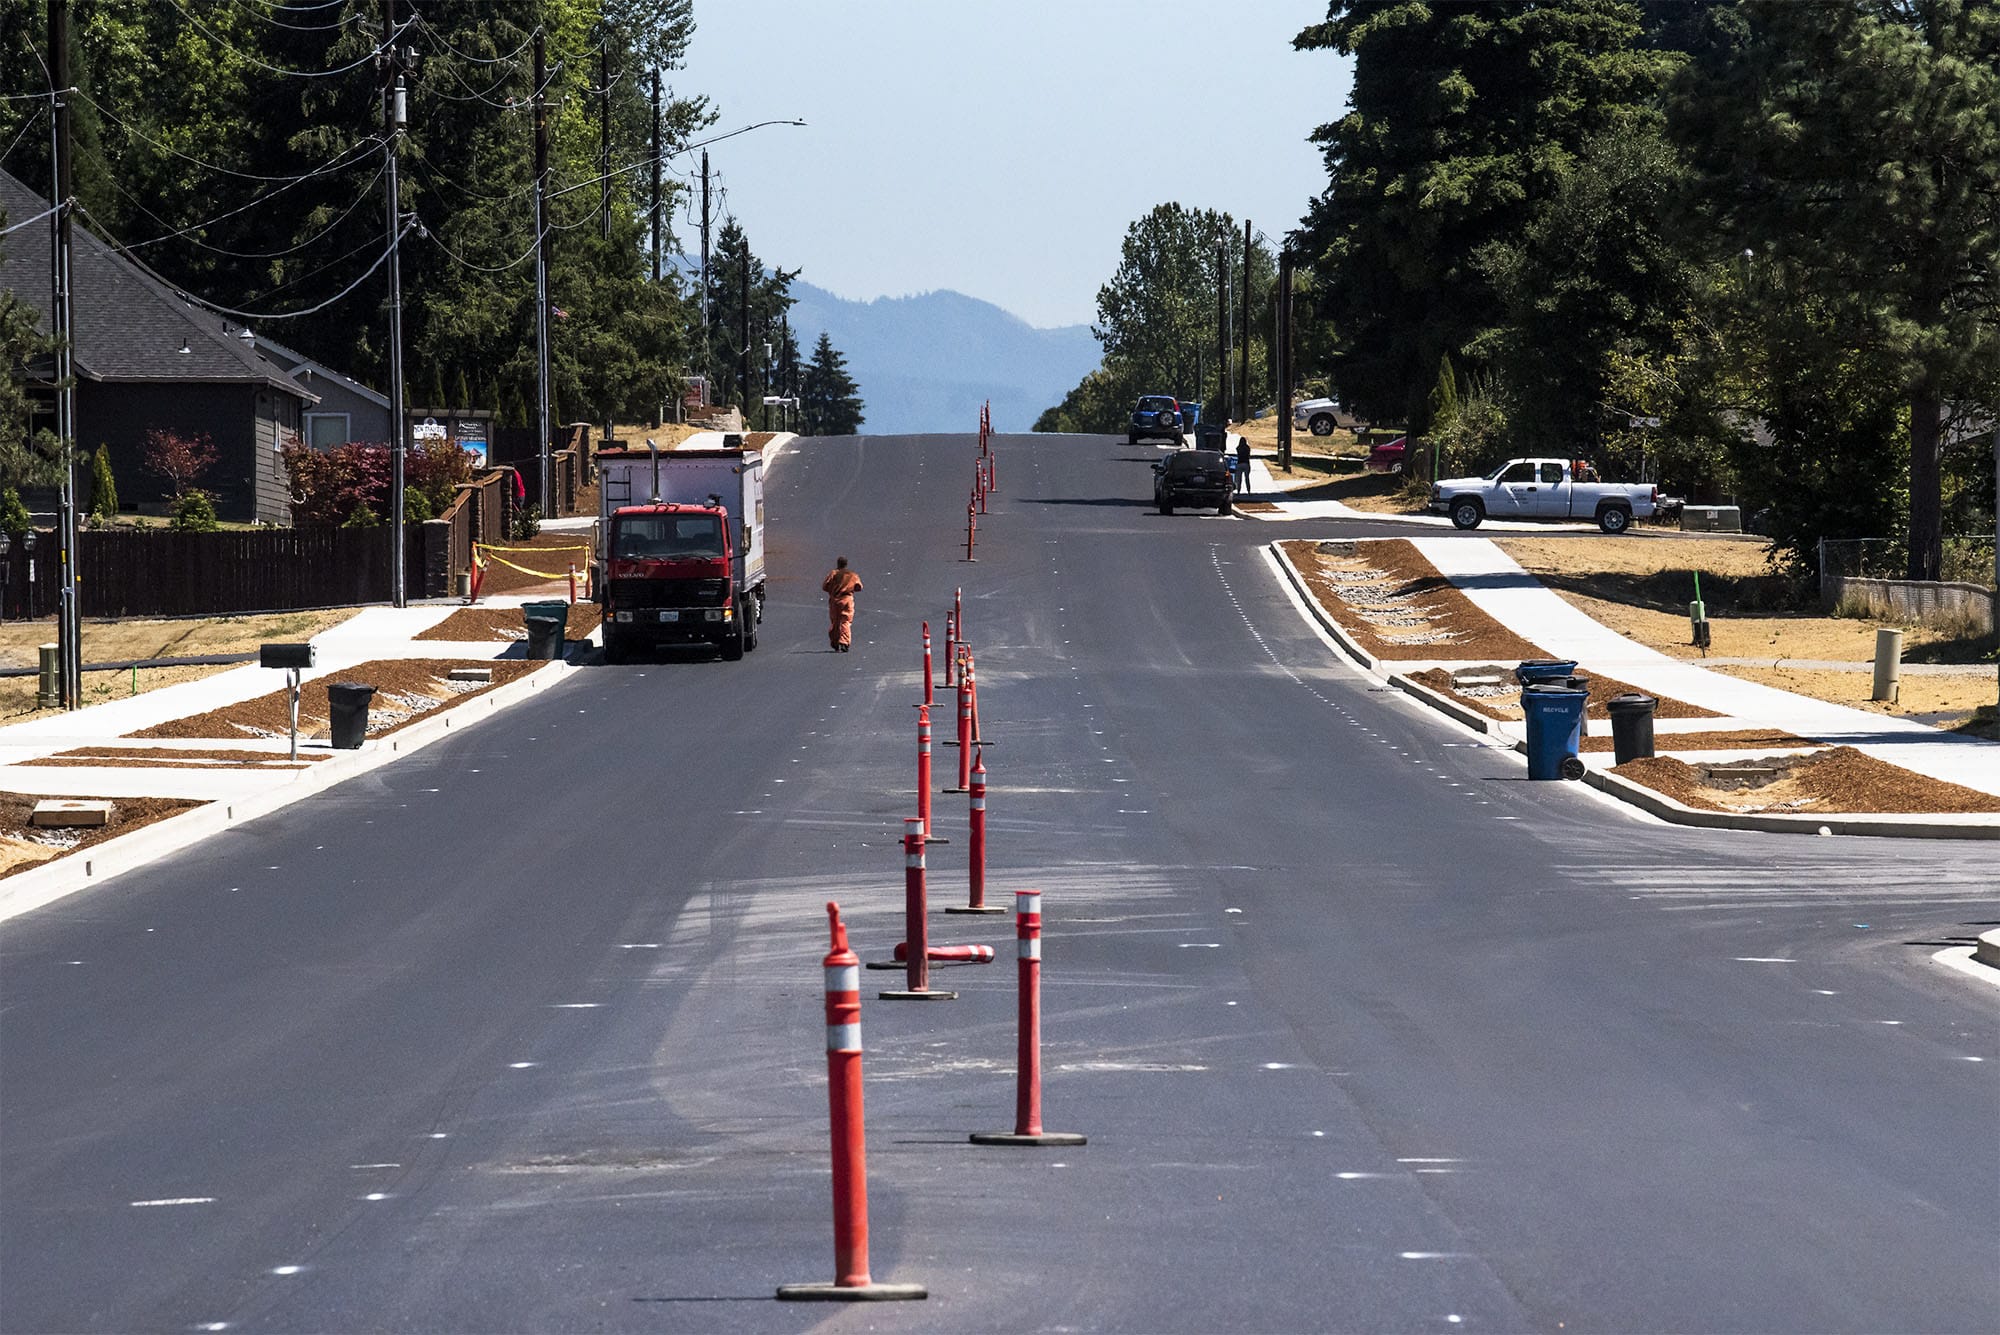 A new phase of improvements to Northeast 119th Street is due to kick off. The former farm road has become a major arterial linking Salmon Creek with Brush Prairie.